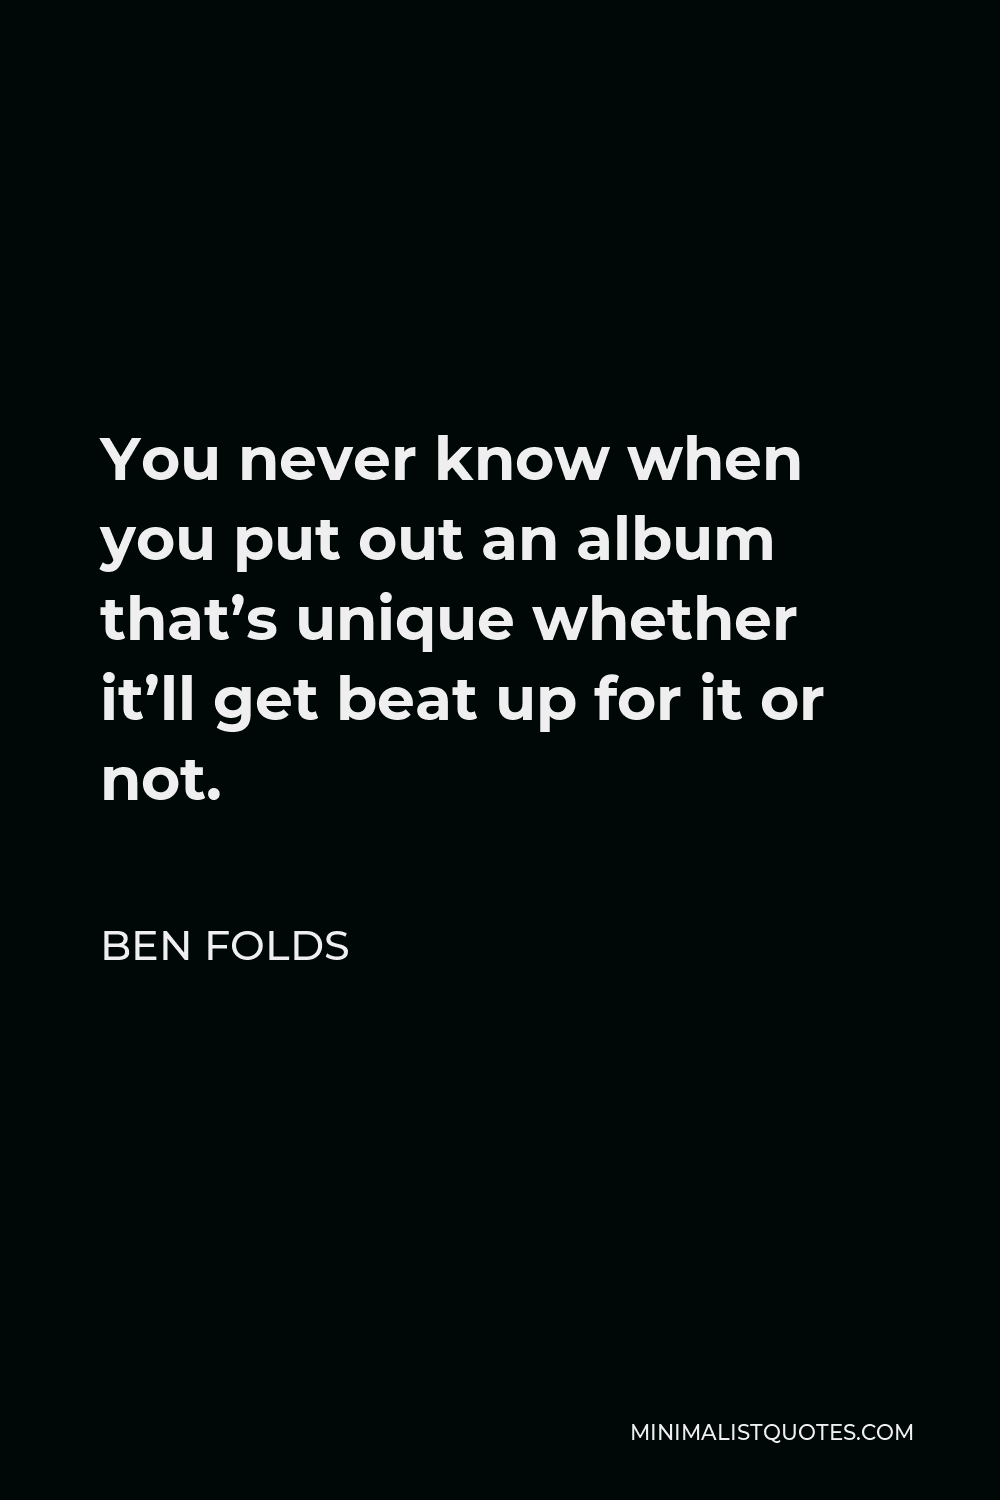 Ben Folds Quote - You never know when you put out an album that’s unique whether it’ll get beat up for it or not.